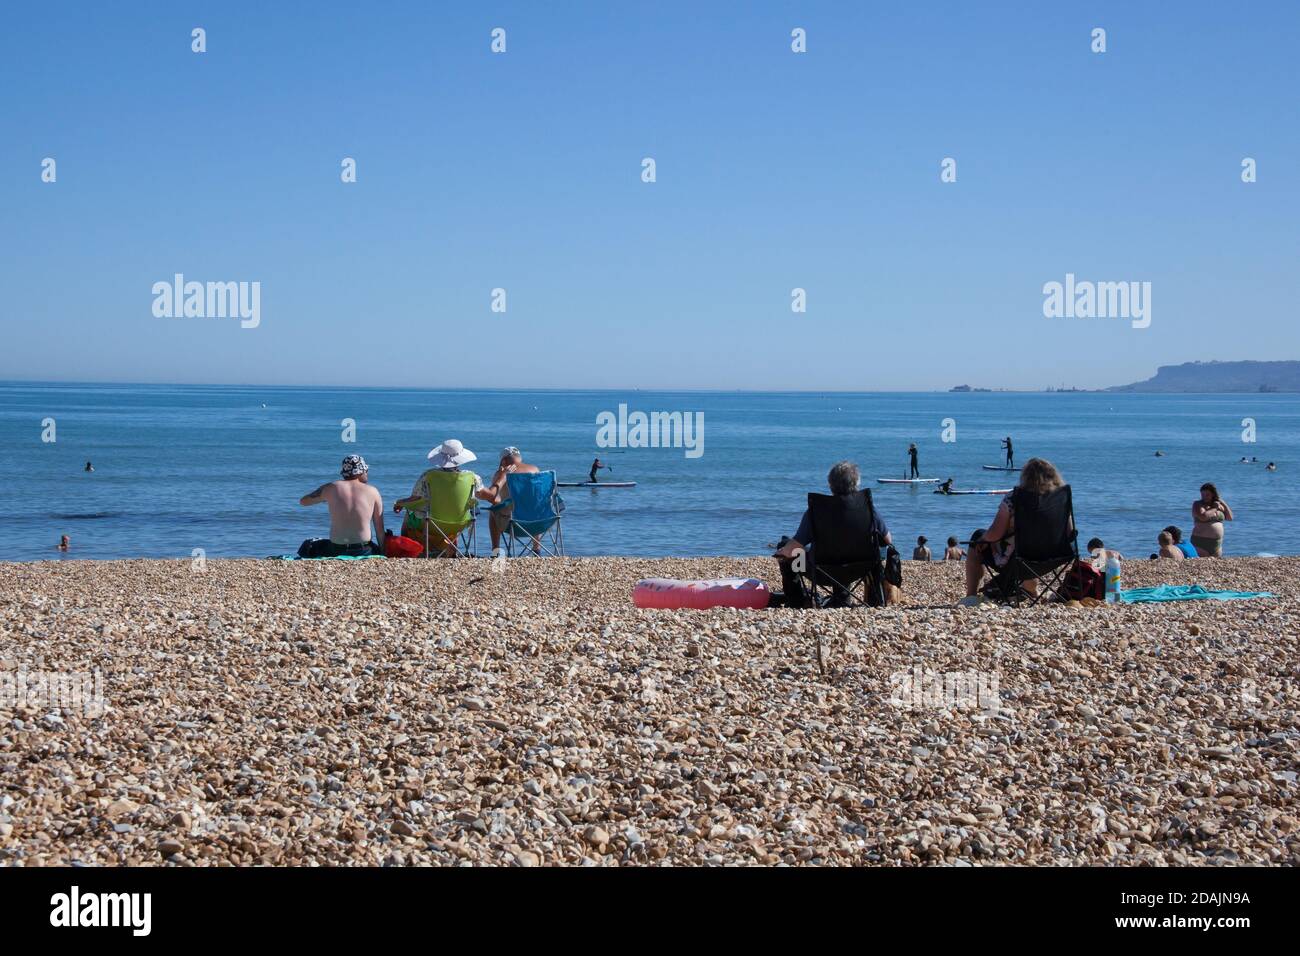 Sunbathers on Overcombe Beach in Dorset in the UK, taken on the 3rd of August 2020 Stock Photo